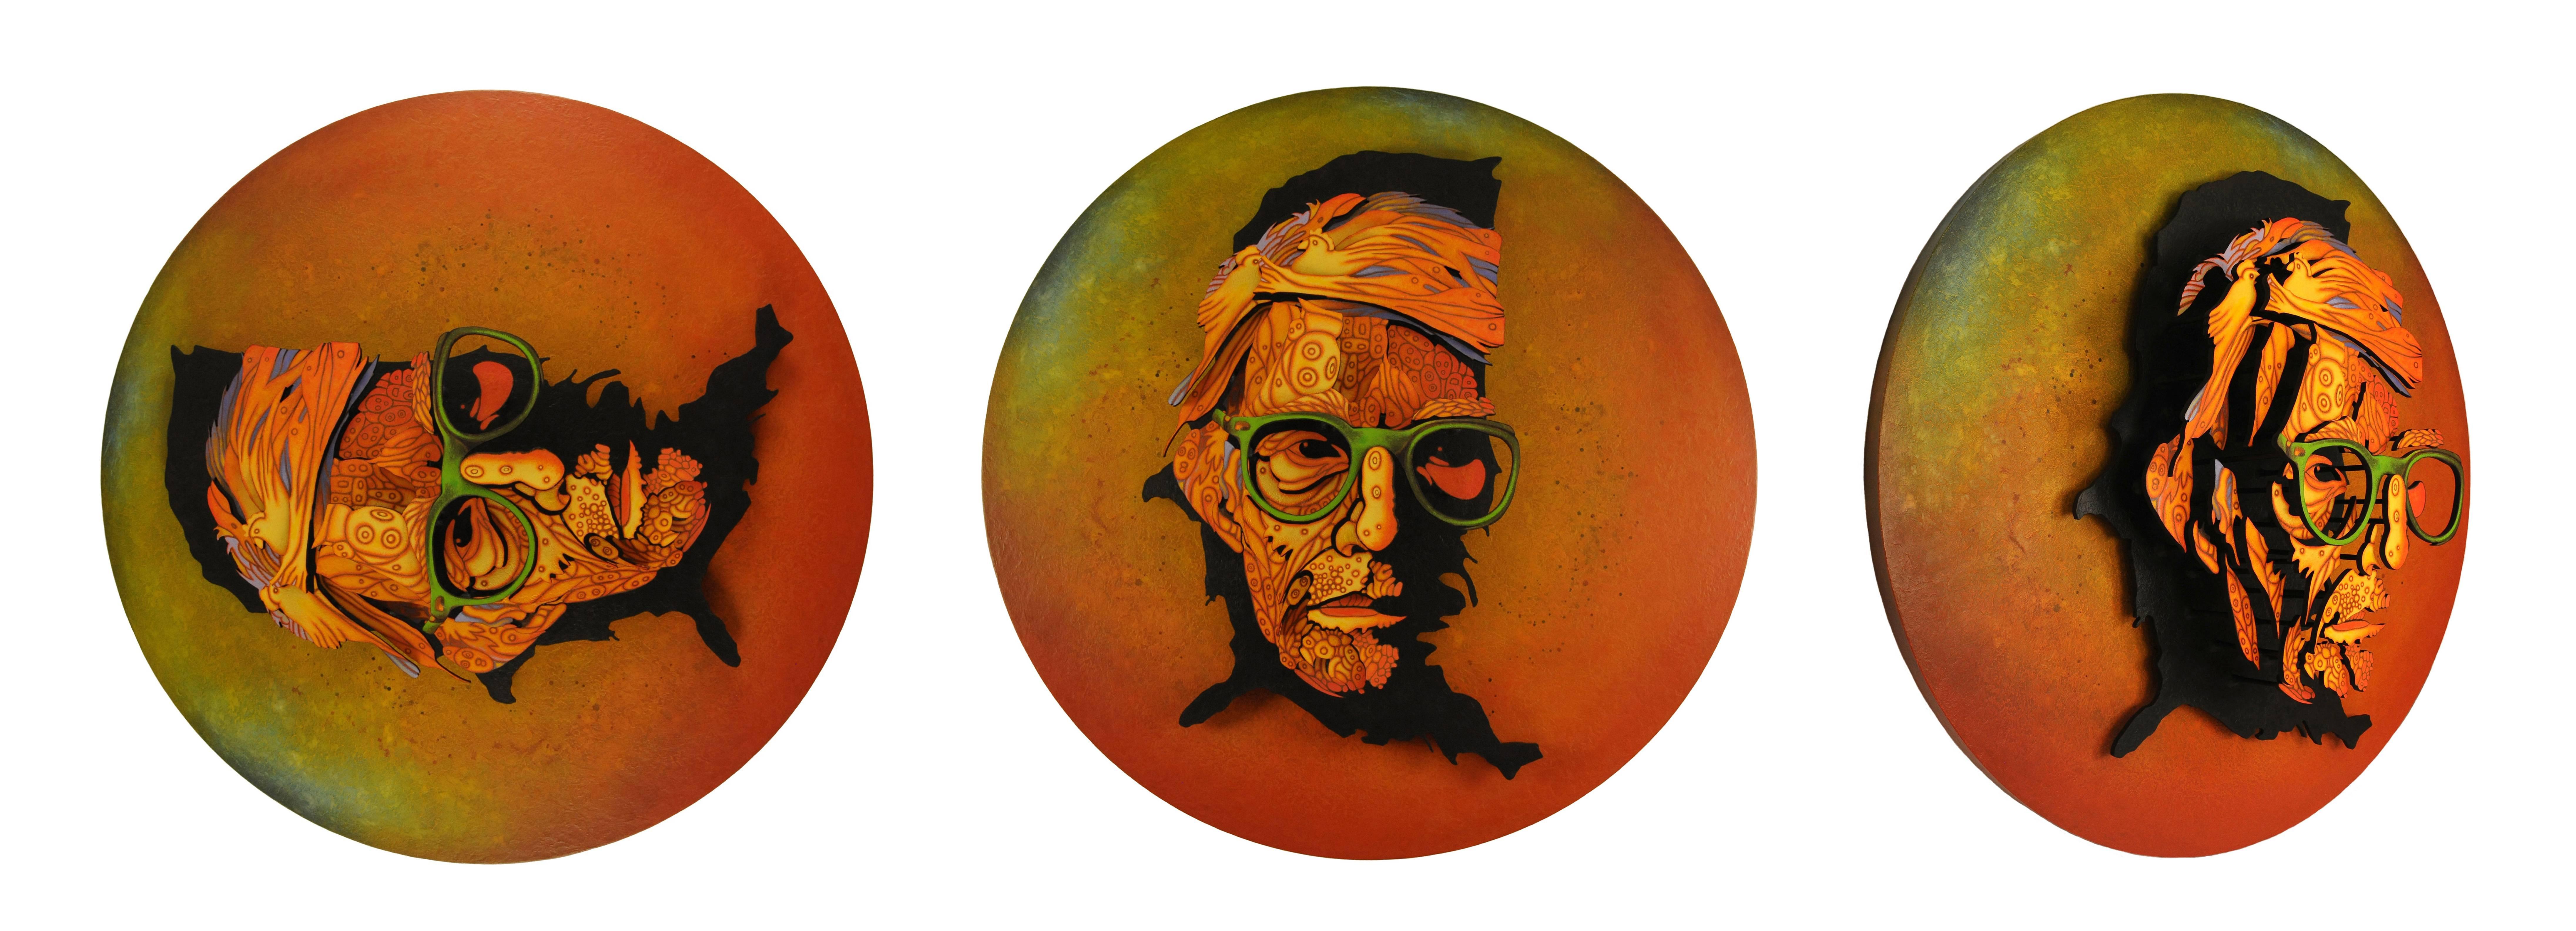 Orange large-scale 3D portrait for Any Warhol on the map of the USA. Wooden wall art. 3D art. 
Signed on the right.
